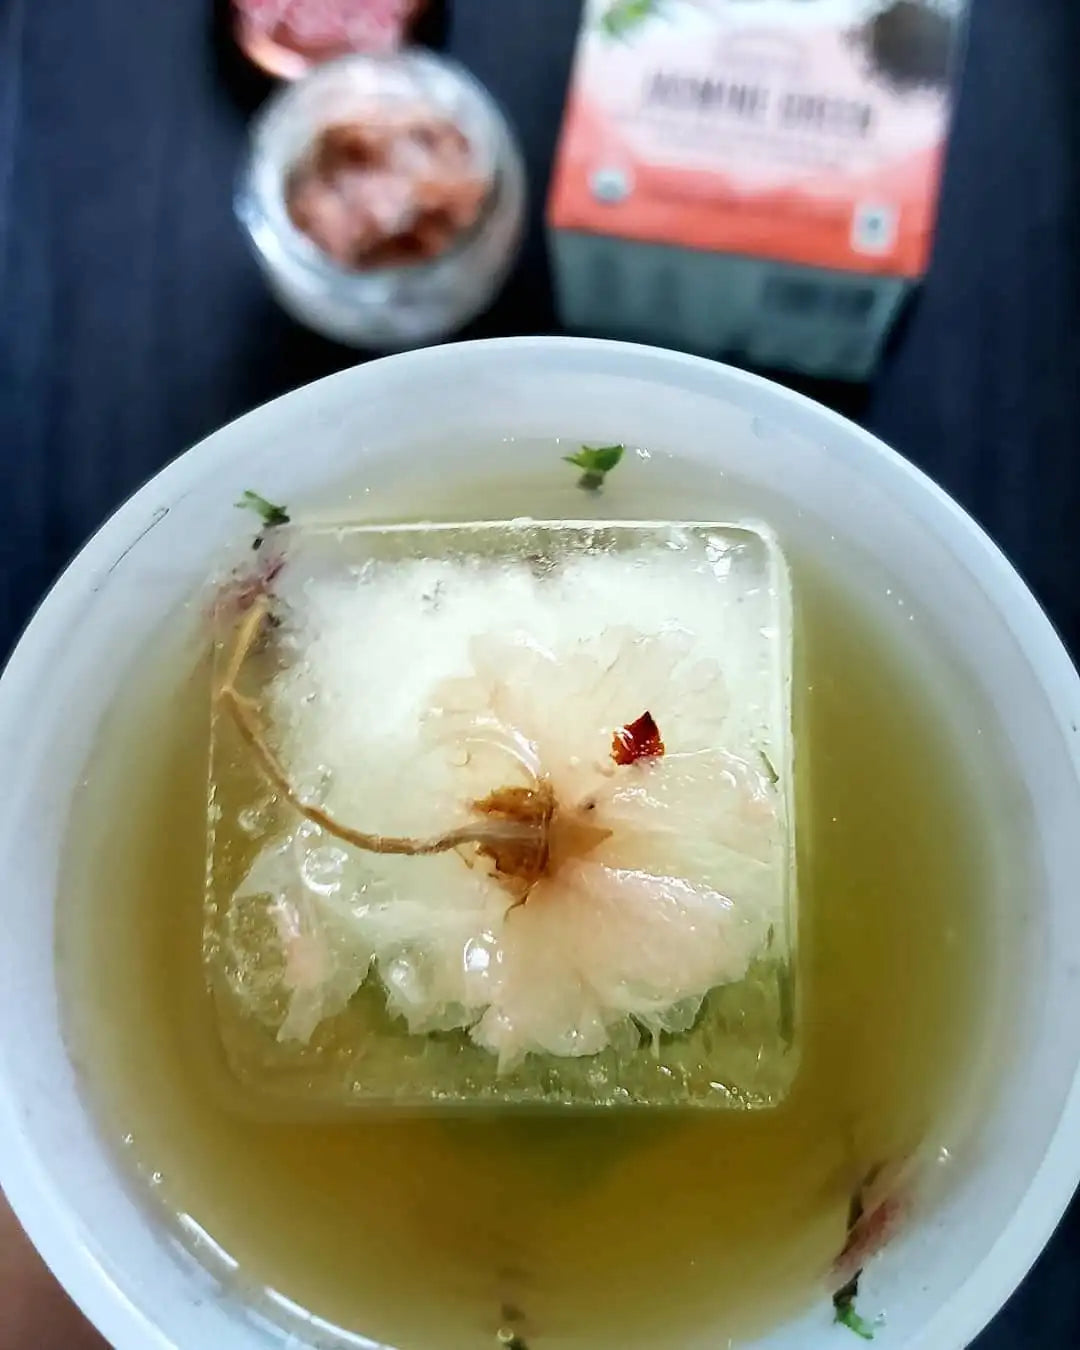 Jasmine Green Iced Tea with Preserved Cherry Blossoms